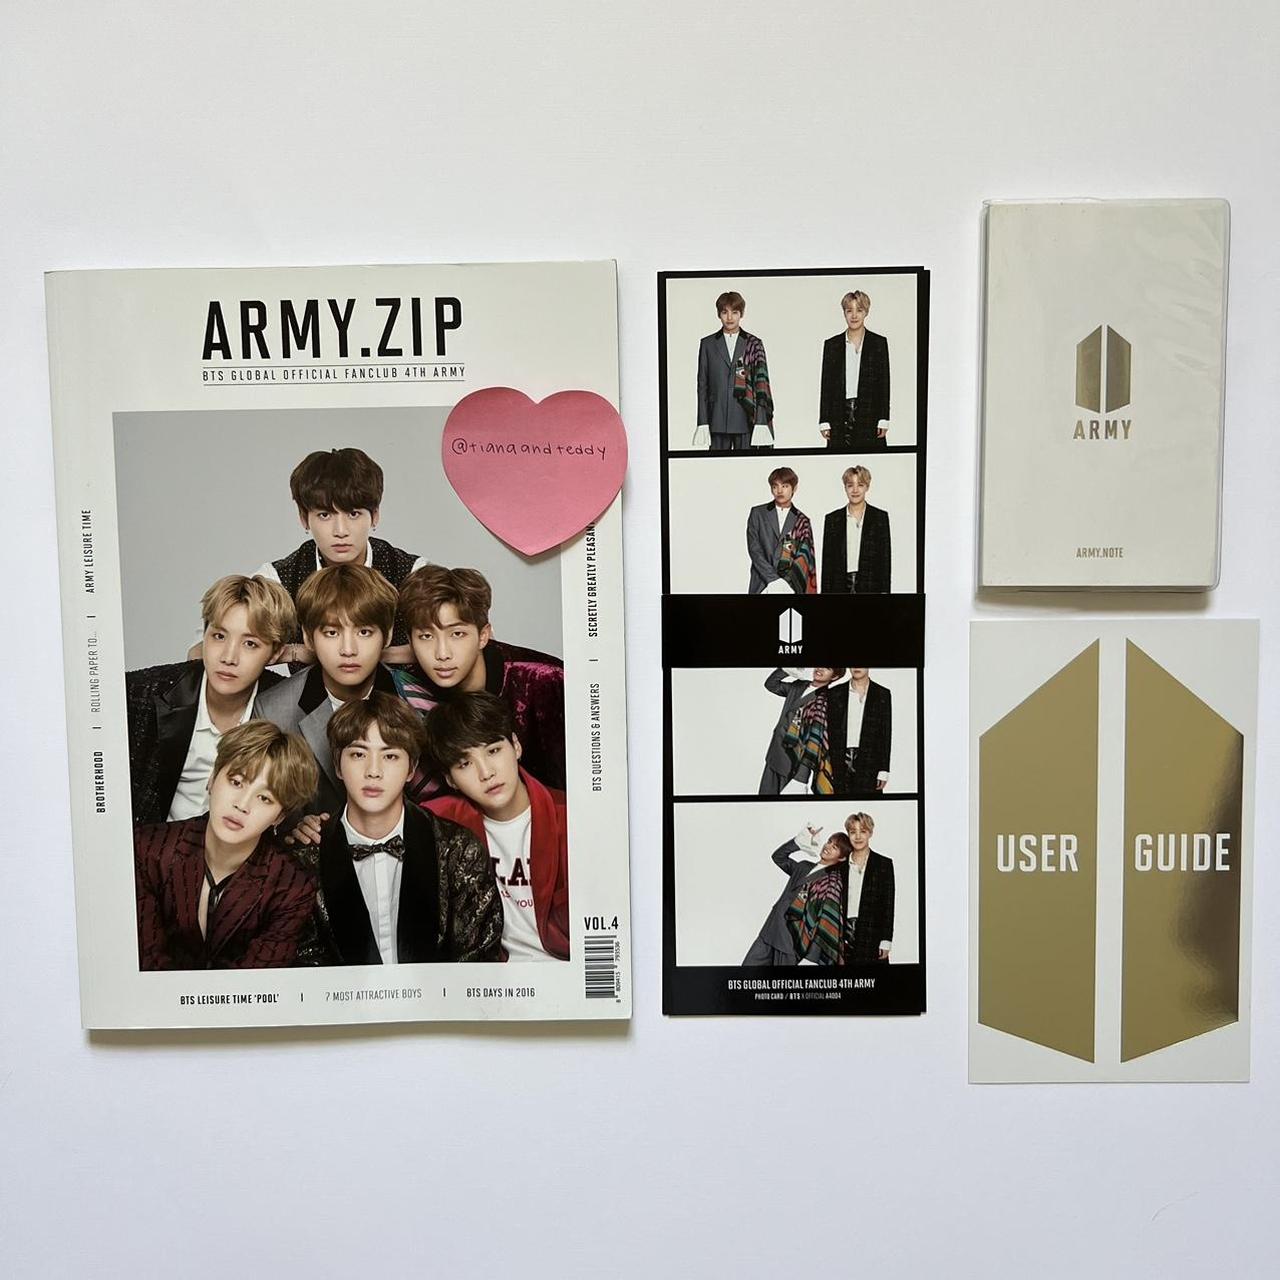 bts global official fanclub 4th army (incomplete)...